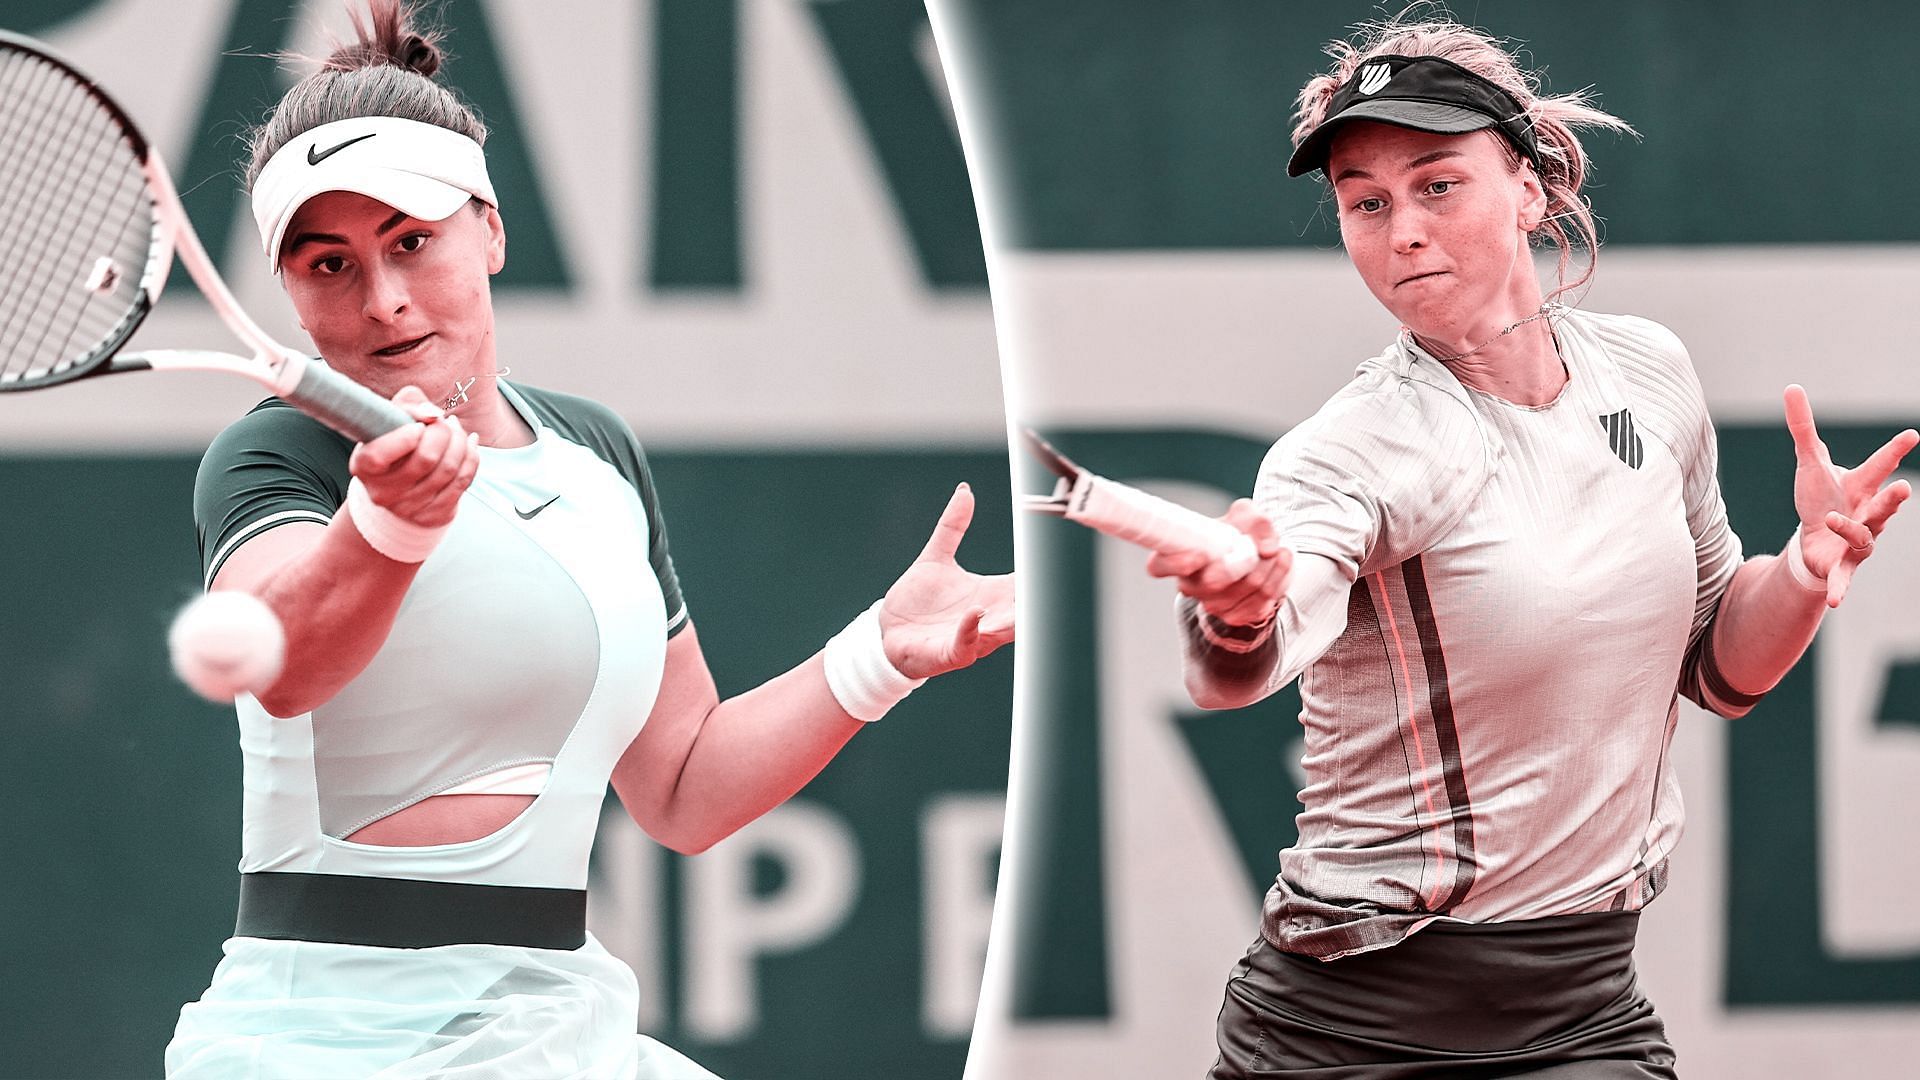 Bianca Andreescu will face Liudmila Samsonova in the first round of the San Diego Open